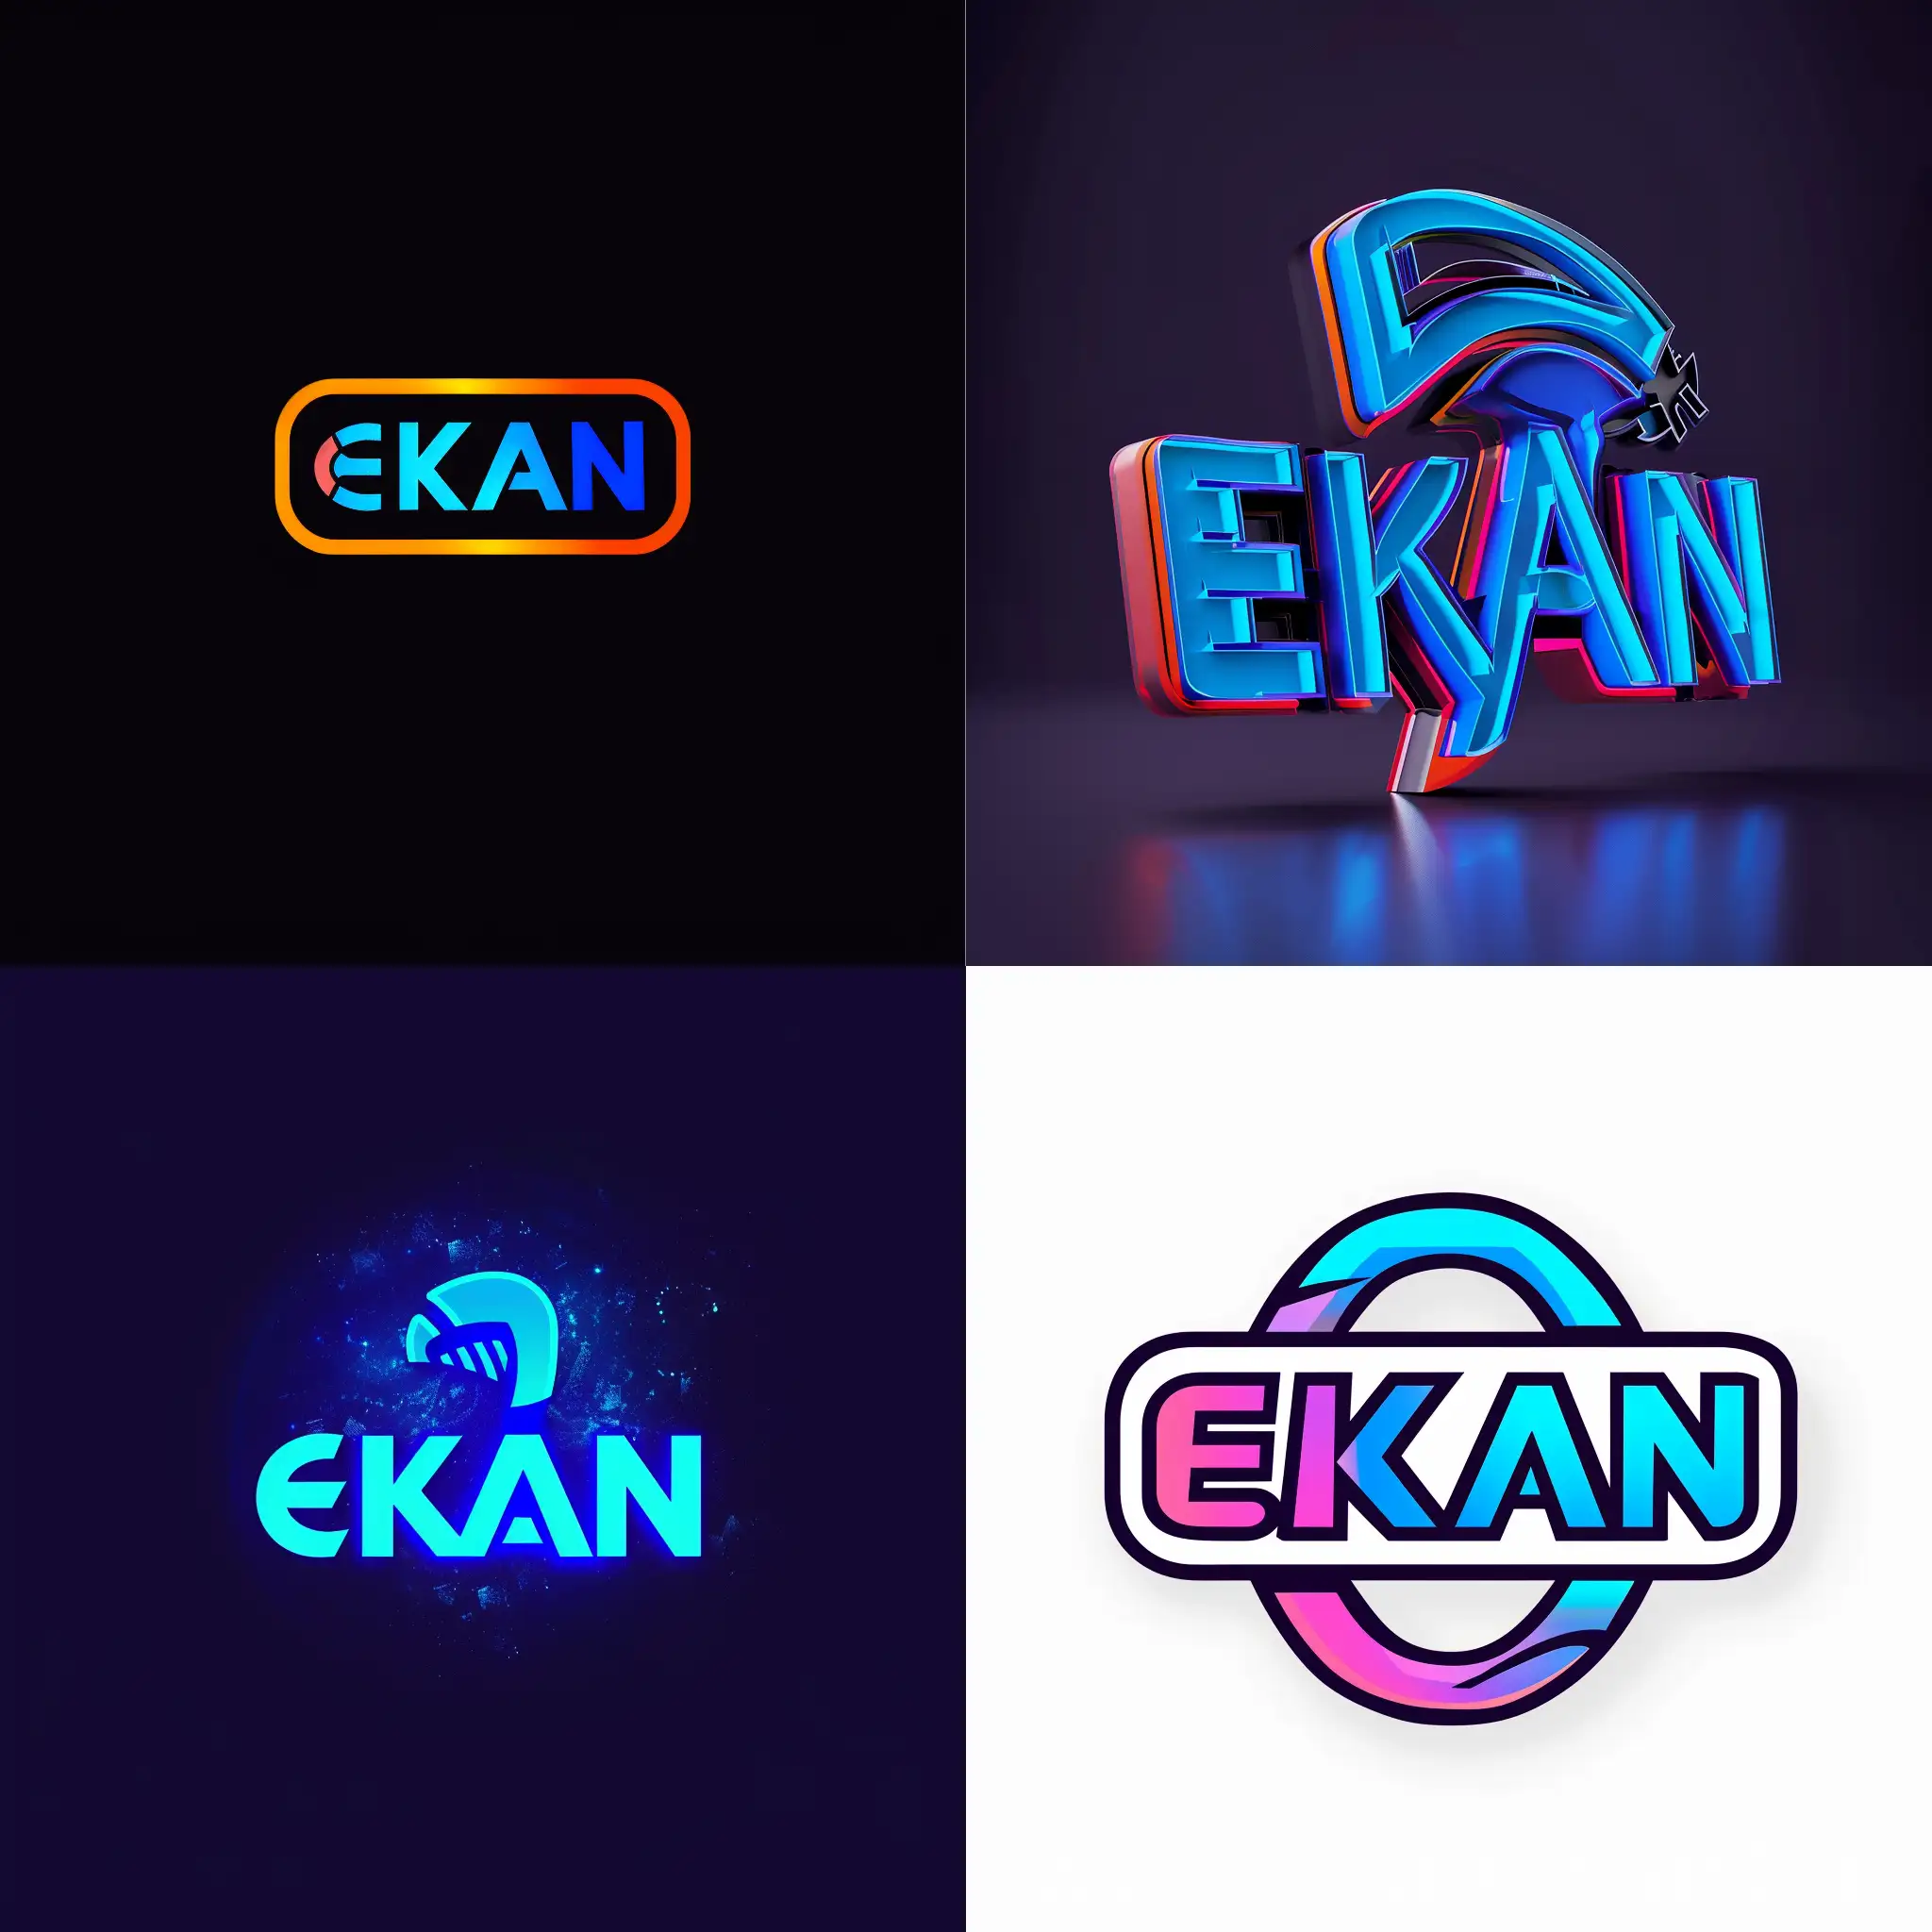 A logo that reads "EKAN" it must look like the PayPal logo